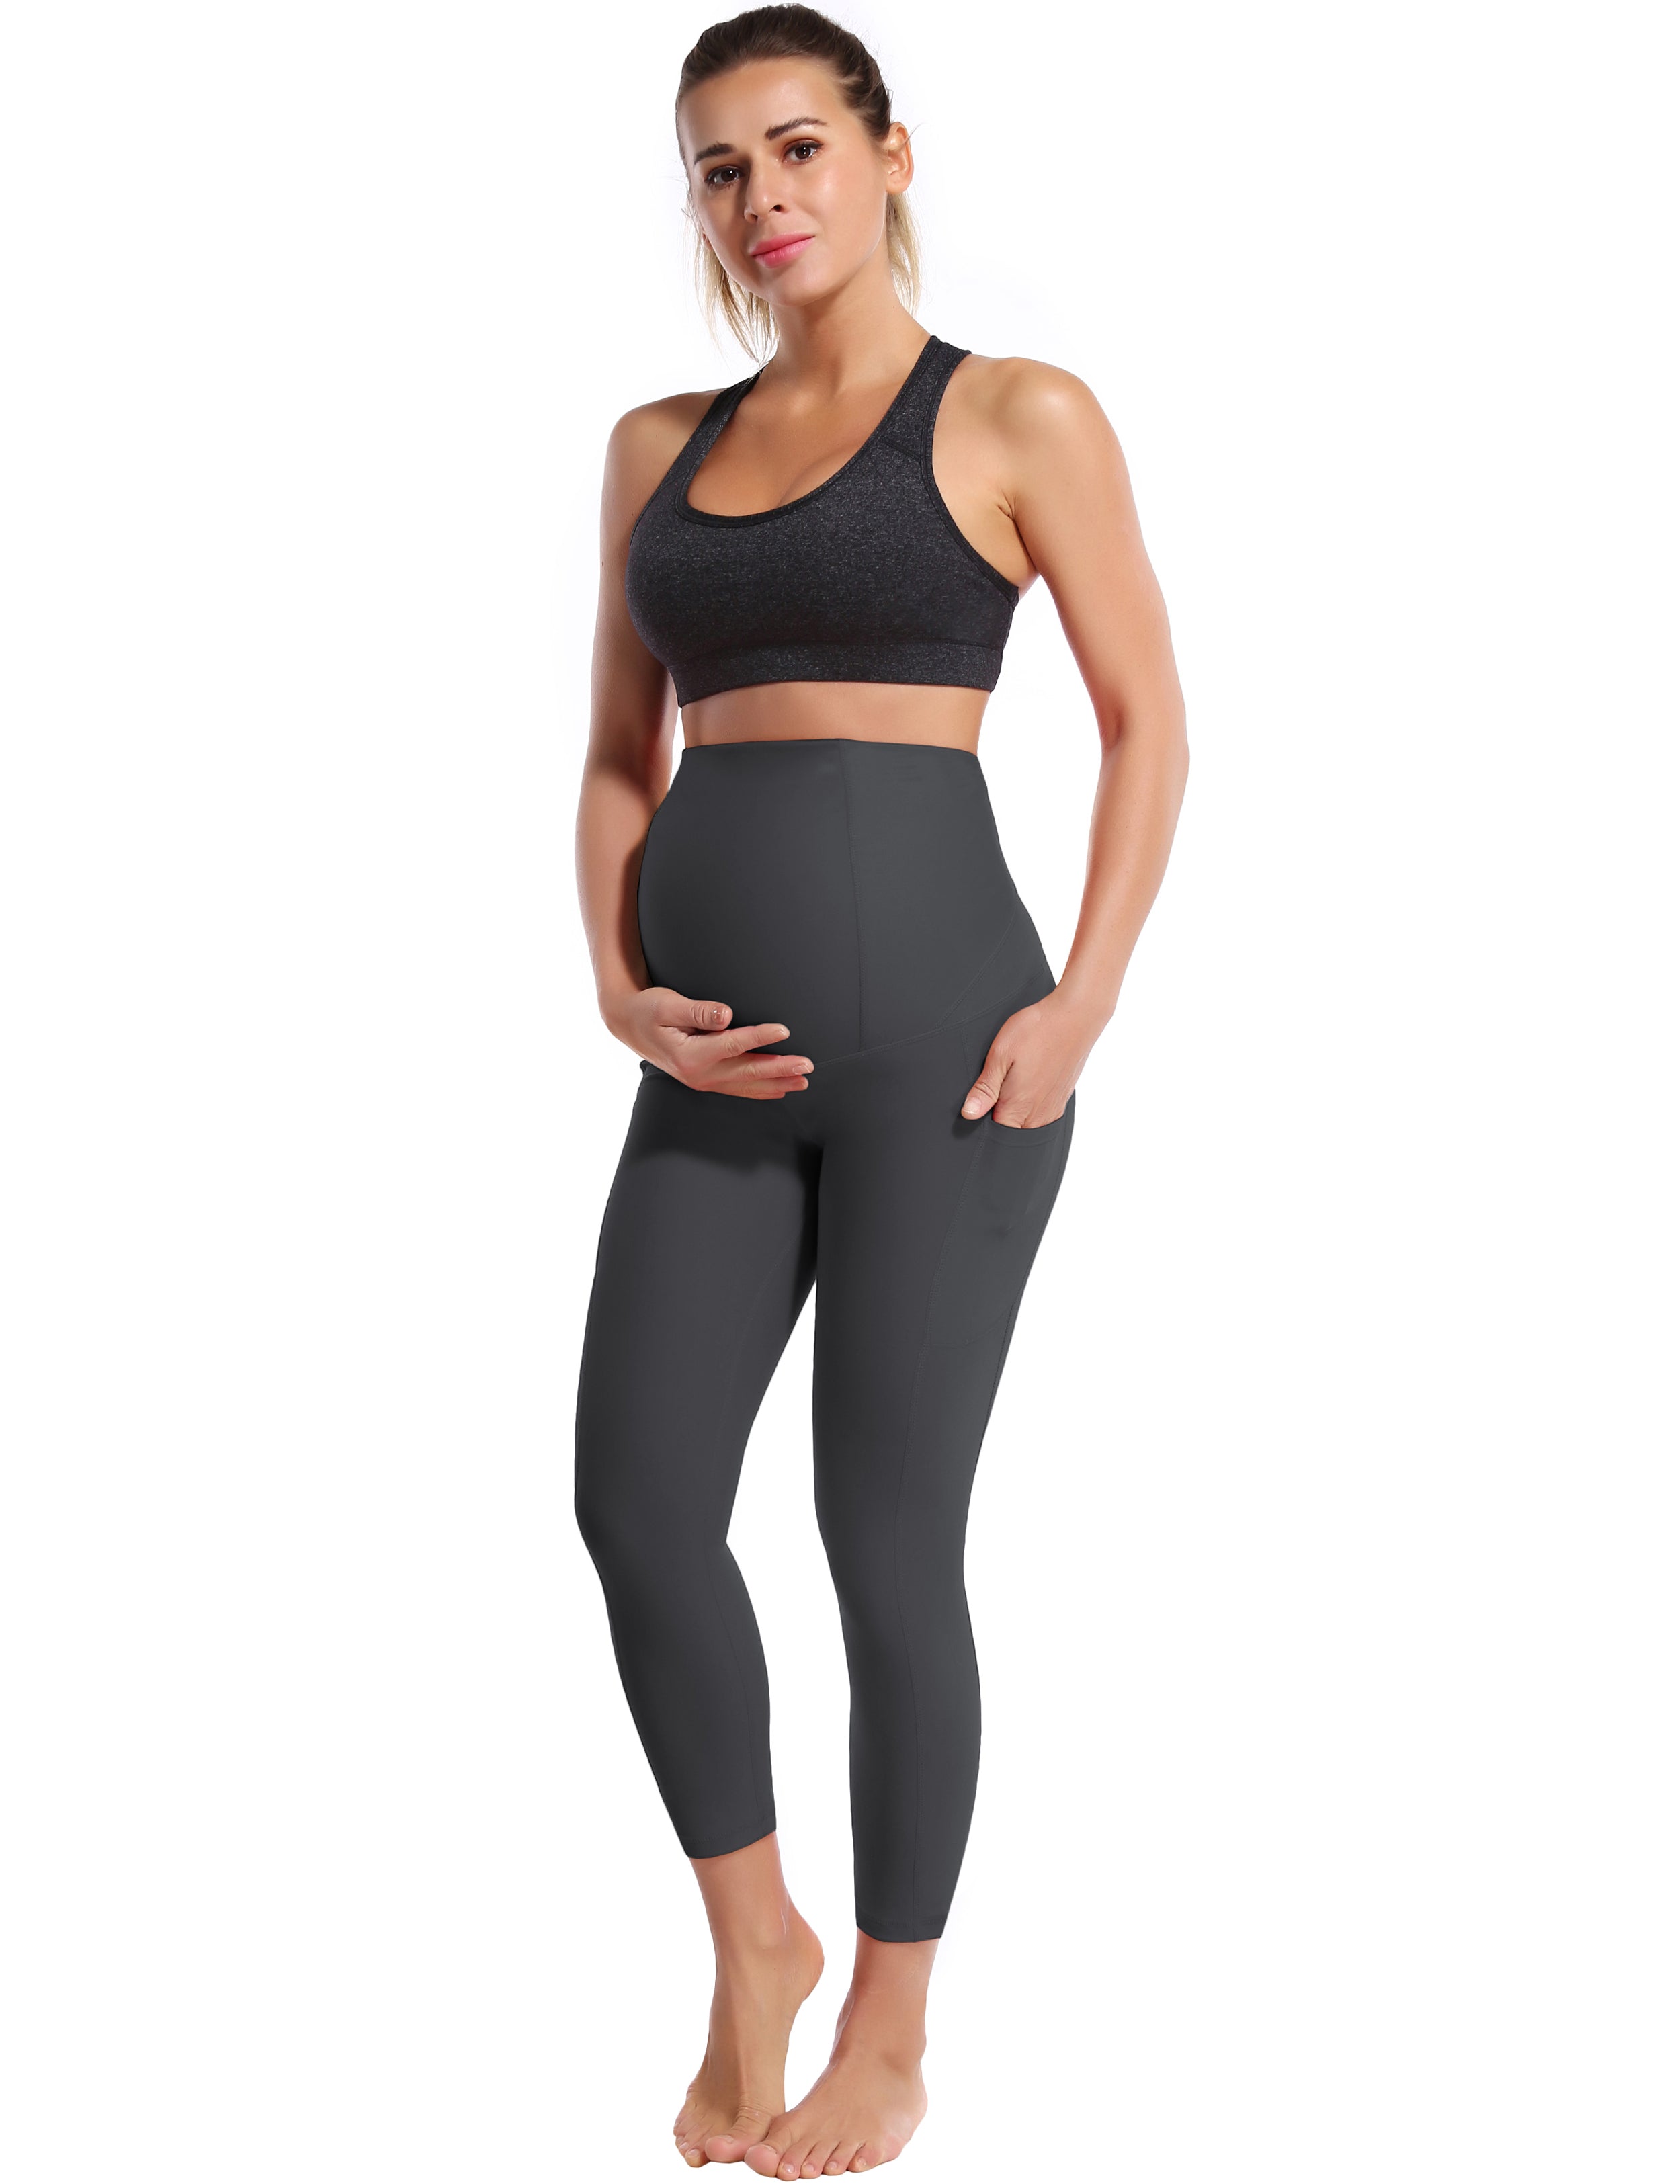 22" Side Pockets Maternity Gym Pants shadowcharcoal 87%Nylon/13%Spandex Softest-ever fabric High elasticity 4-way stretch Fabric doesn't attract lint easily No see-through Moisture-wicking Machine wash